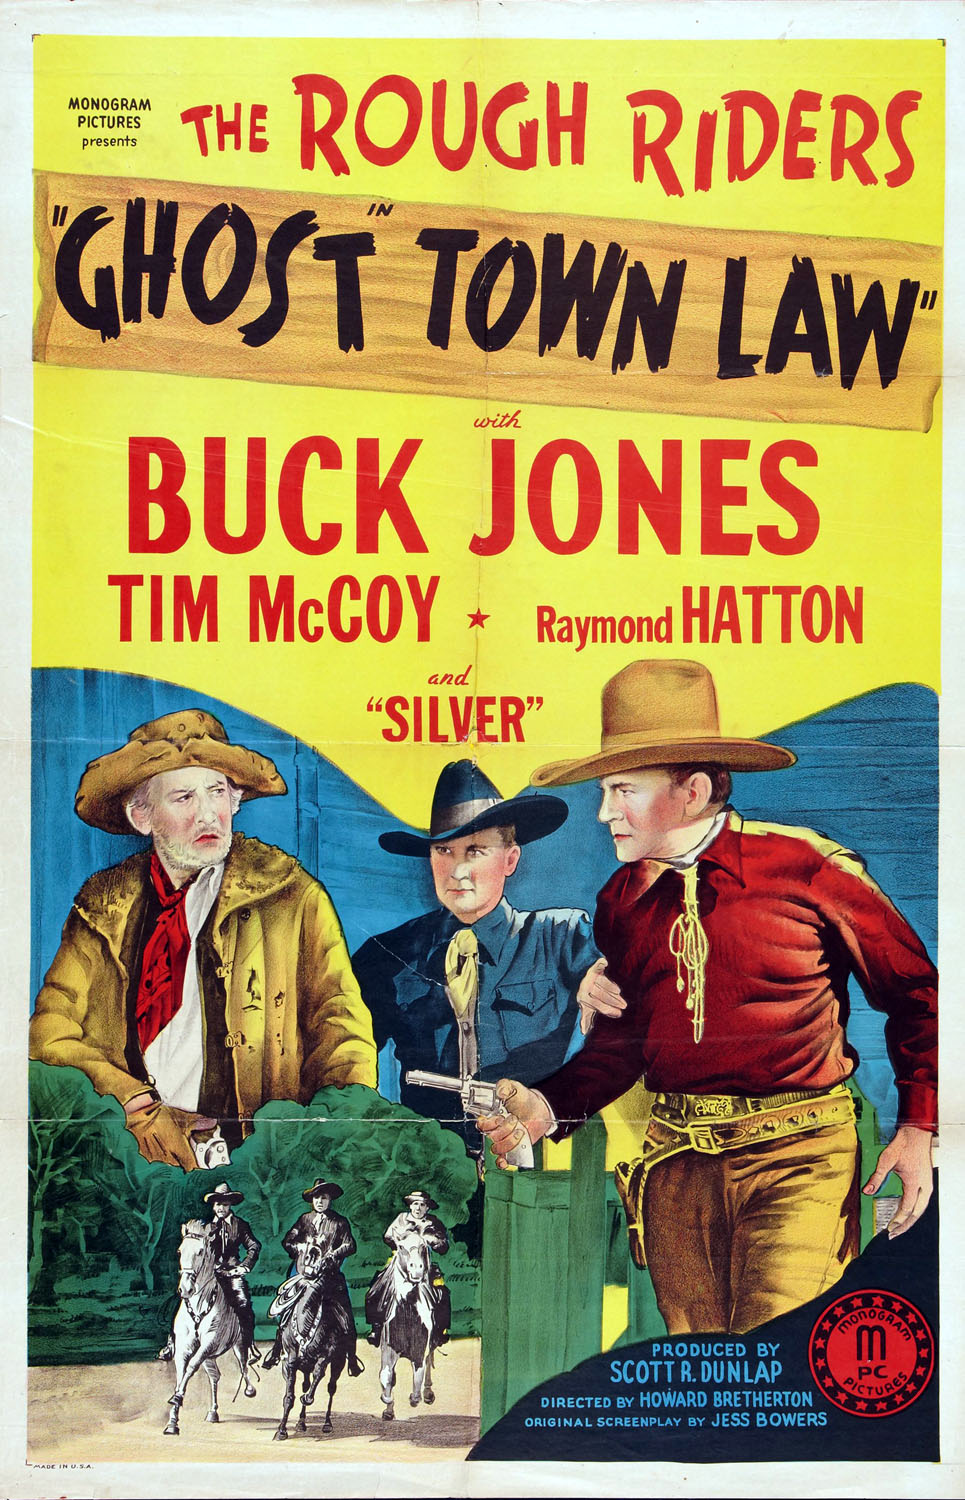 GHOST TOWN LAW